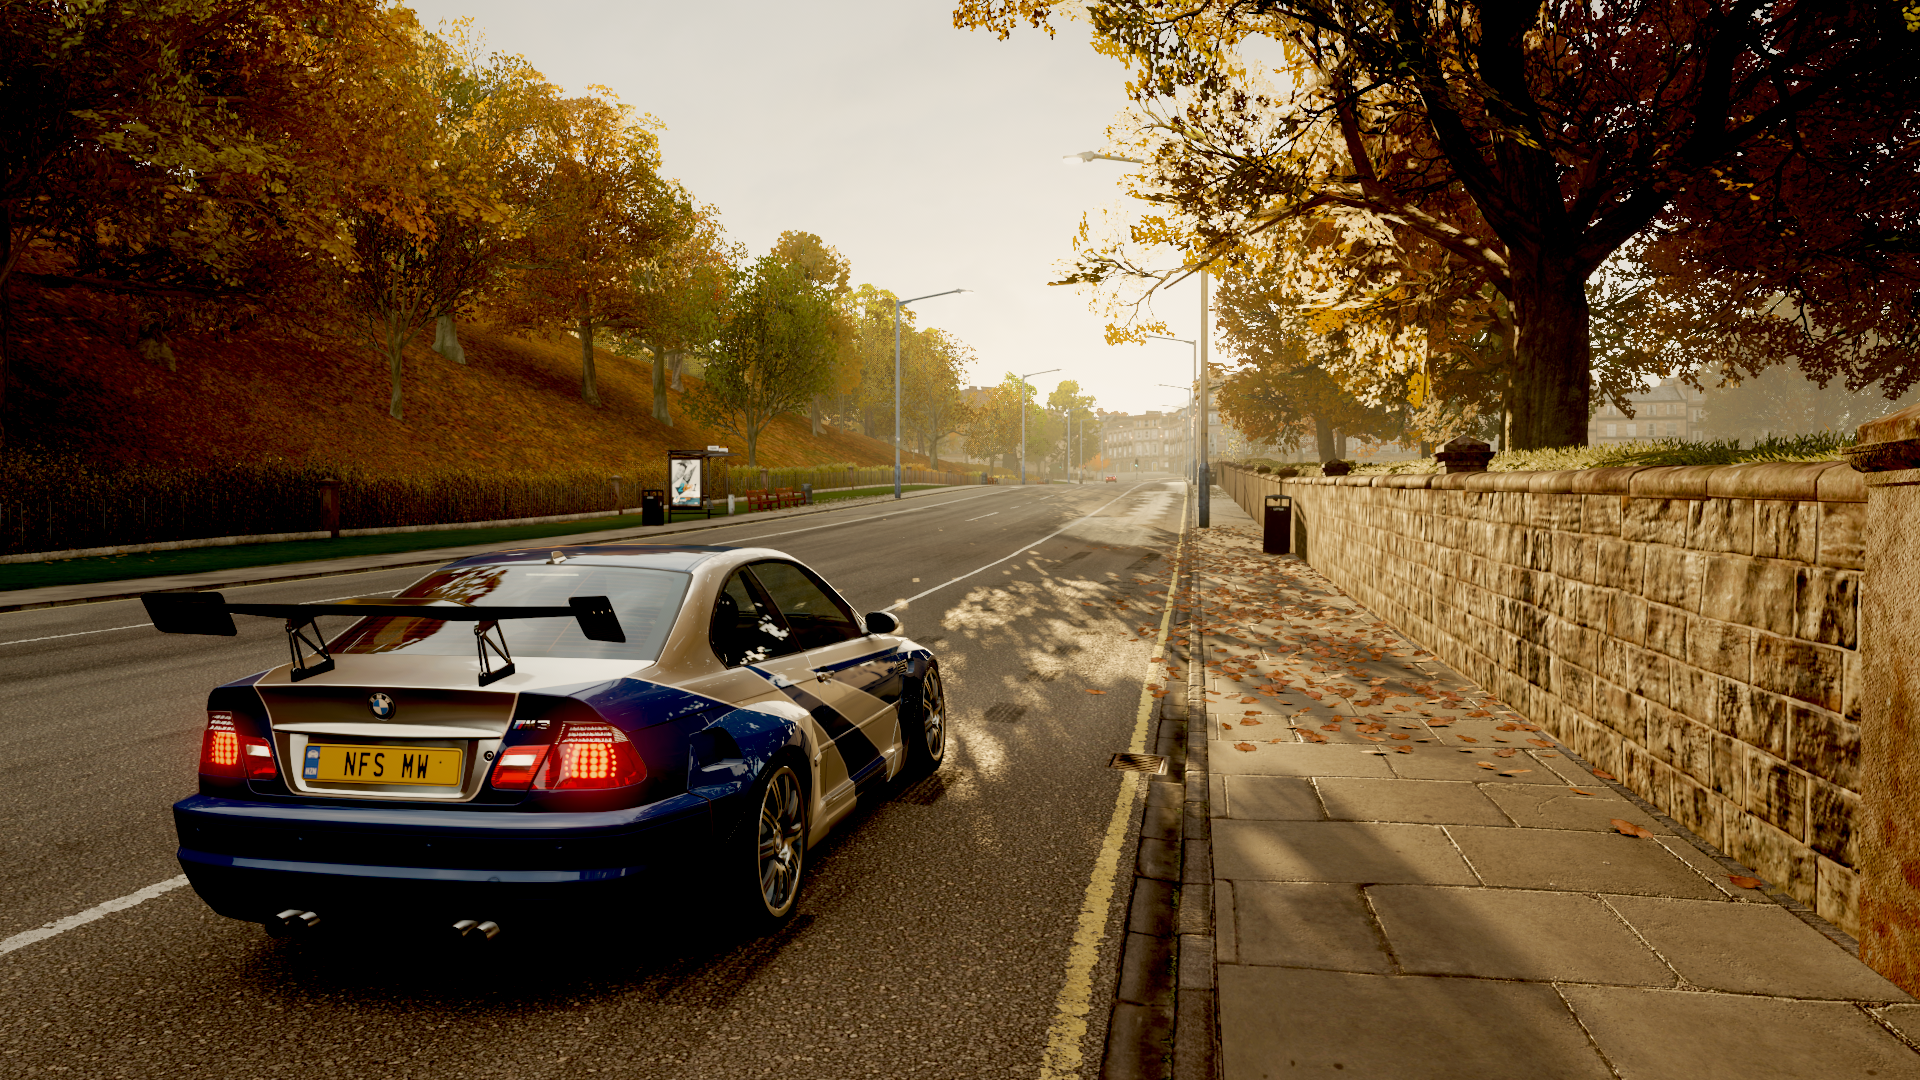 BMW BMW M3 E46 E 46 Forza Horizon 4 Need For Speed Need For Speed Most Wanted Drifting BMW M3 E46 GT 1920x1080